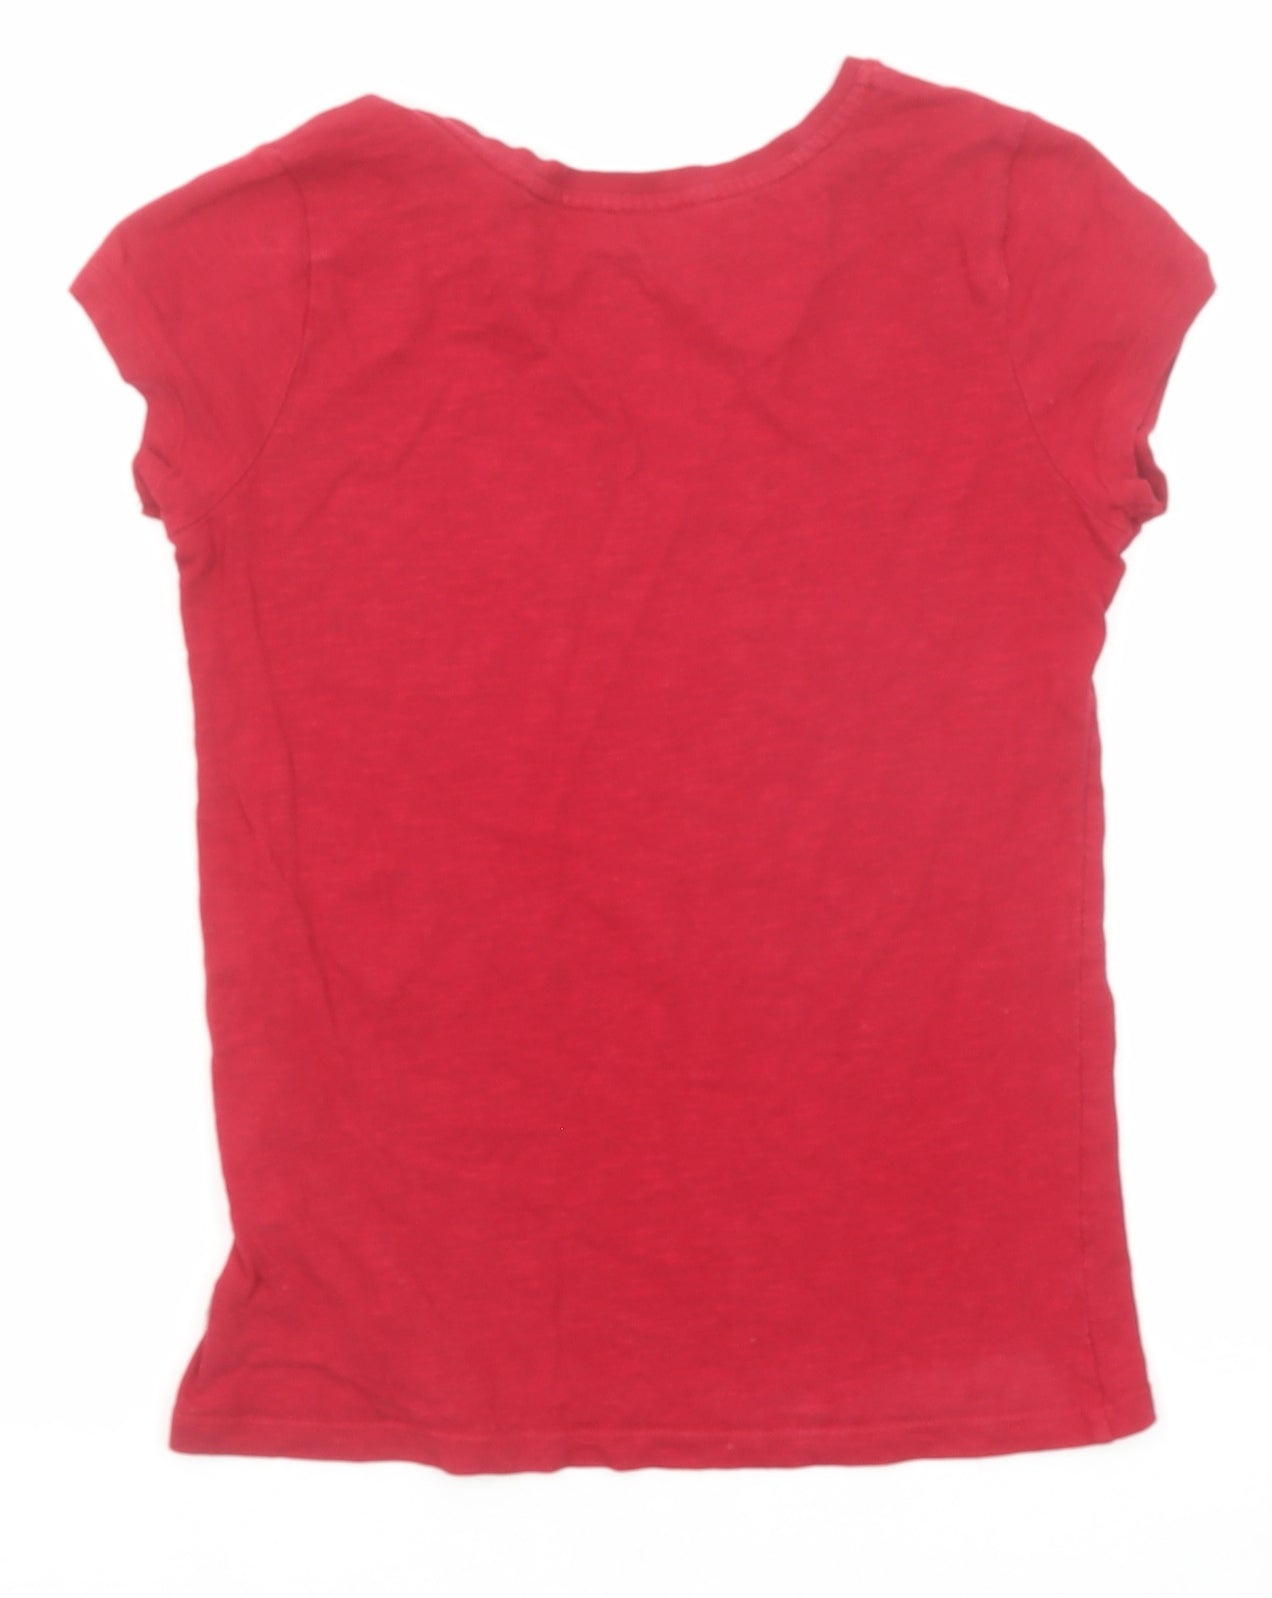 Canadiana Womens Red Cotton Basic T-Shirt Size 10 Crew Neck - Canada